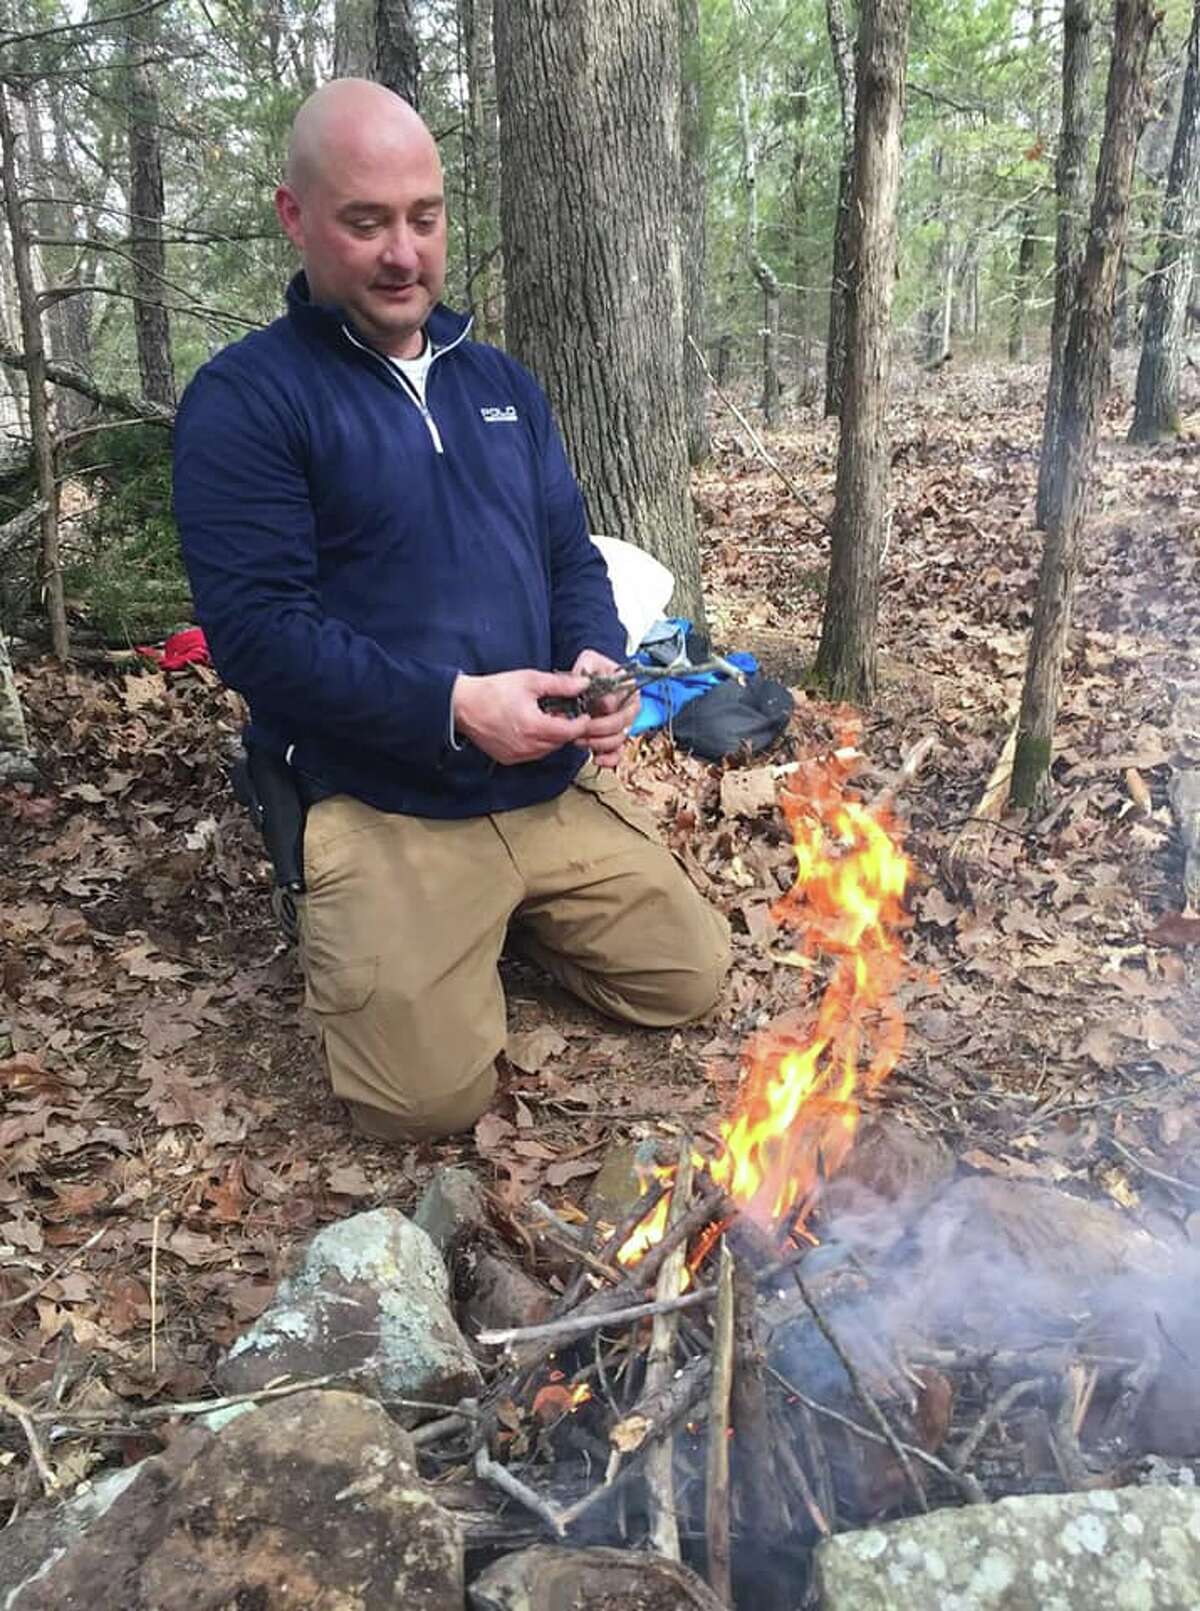 "We wanted to make it affordable," Giles said. Here are seven basics that Giles covers in his survival classes: Best way to build a fire Trauma First Aid How to build an expedient shelter  How to use a compass How to purify water Essential knots Psychological aspects of any survival situation